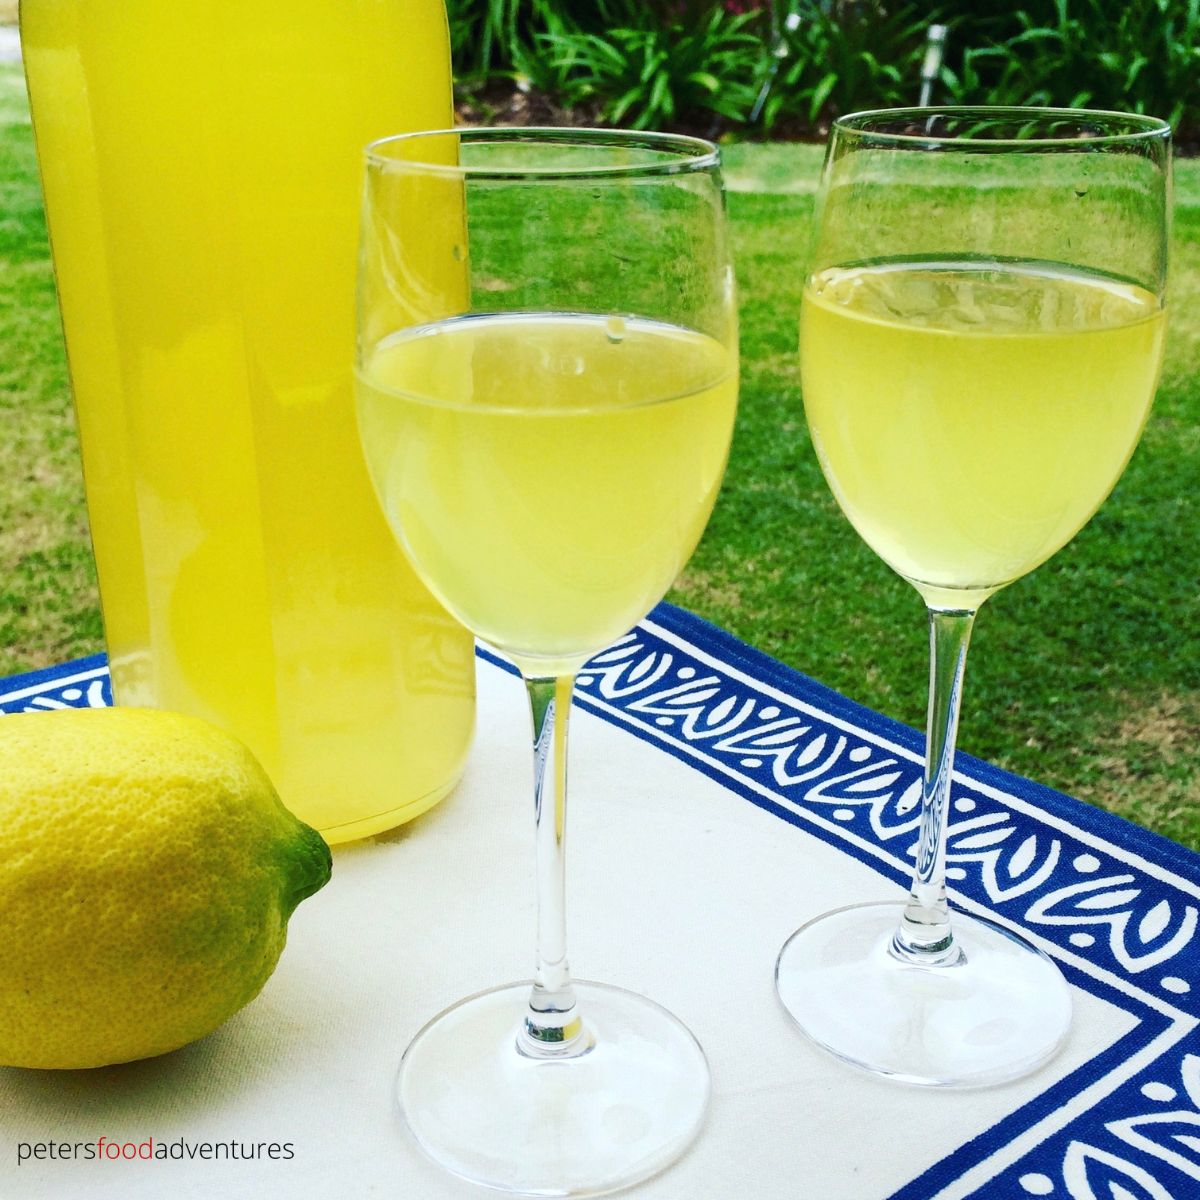 2 glasses of limoncello outside on a table